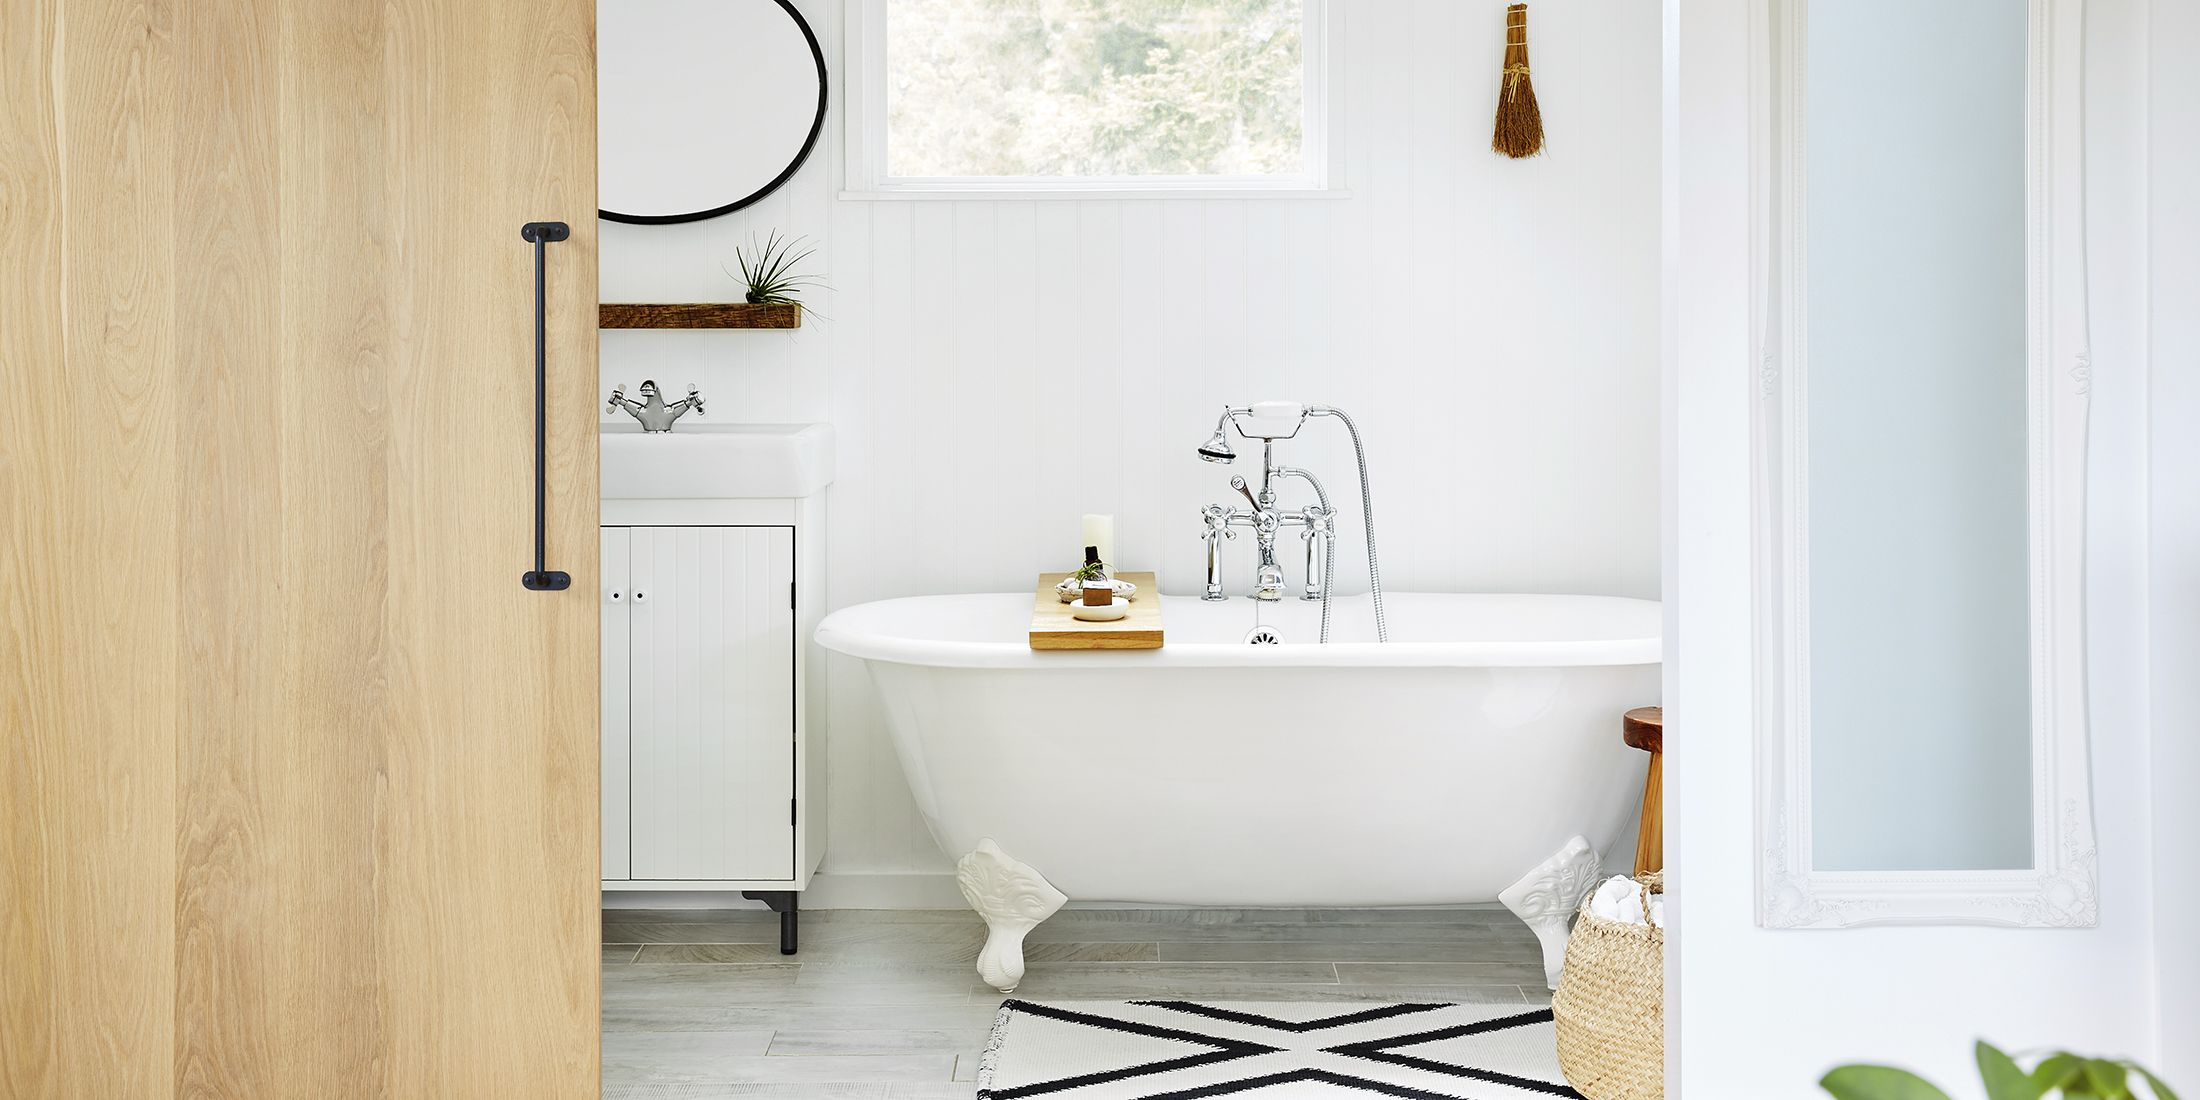 How to Clean Tub, Tile, and MORE!